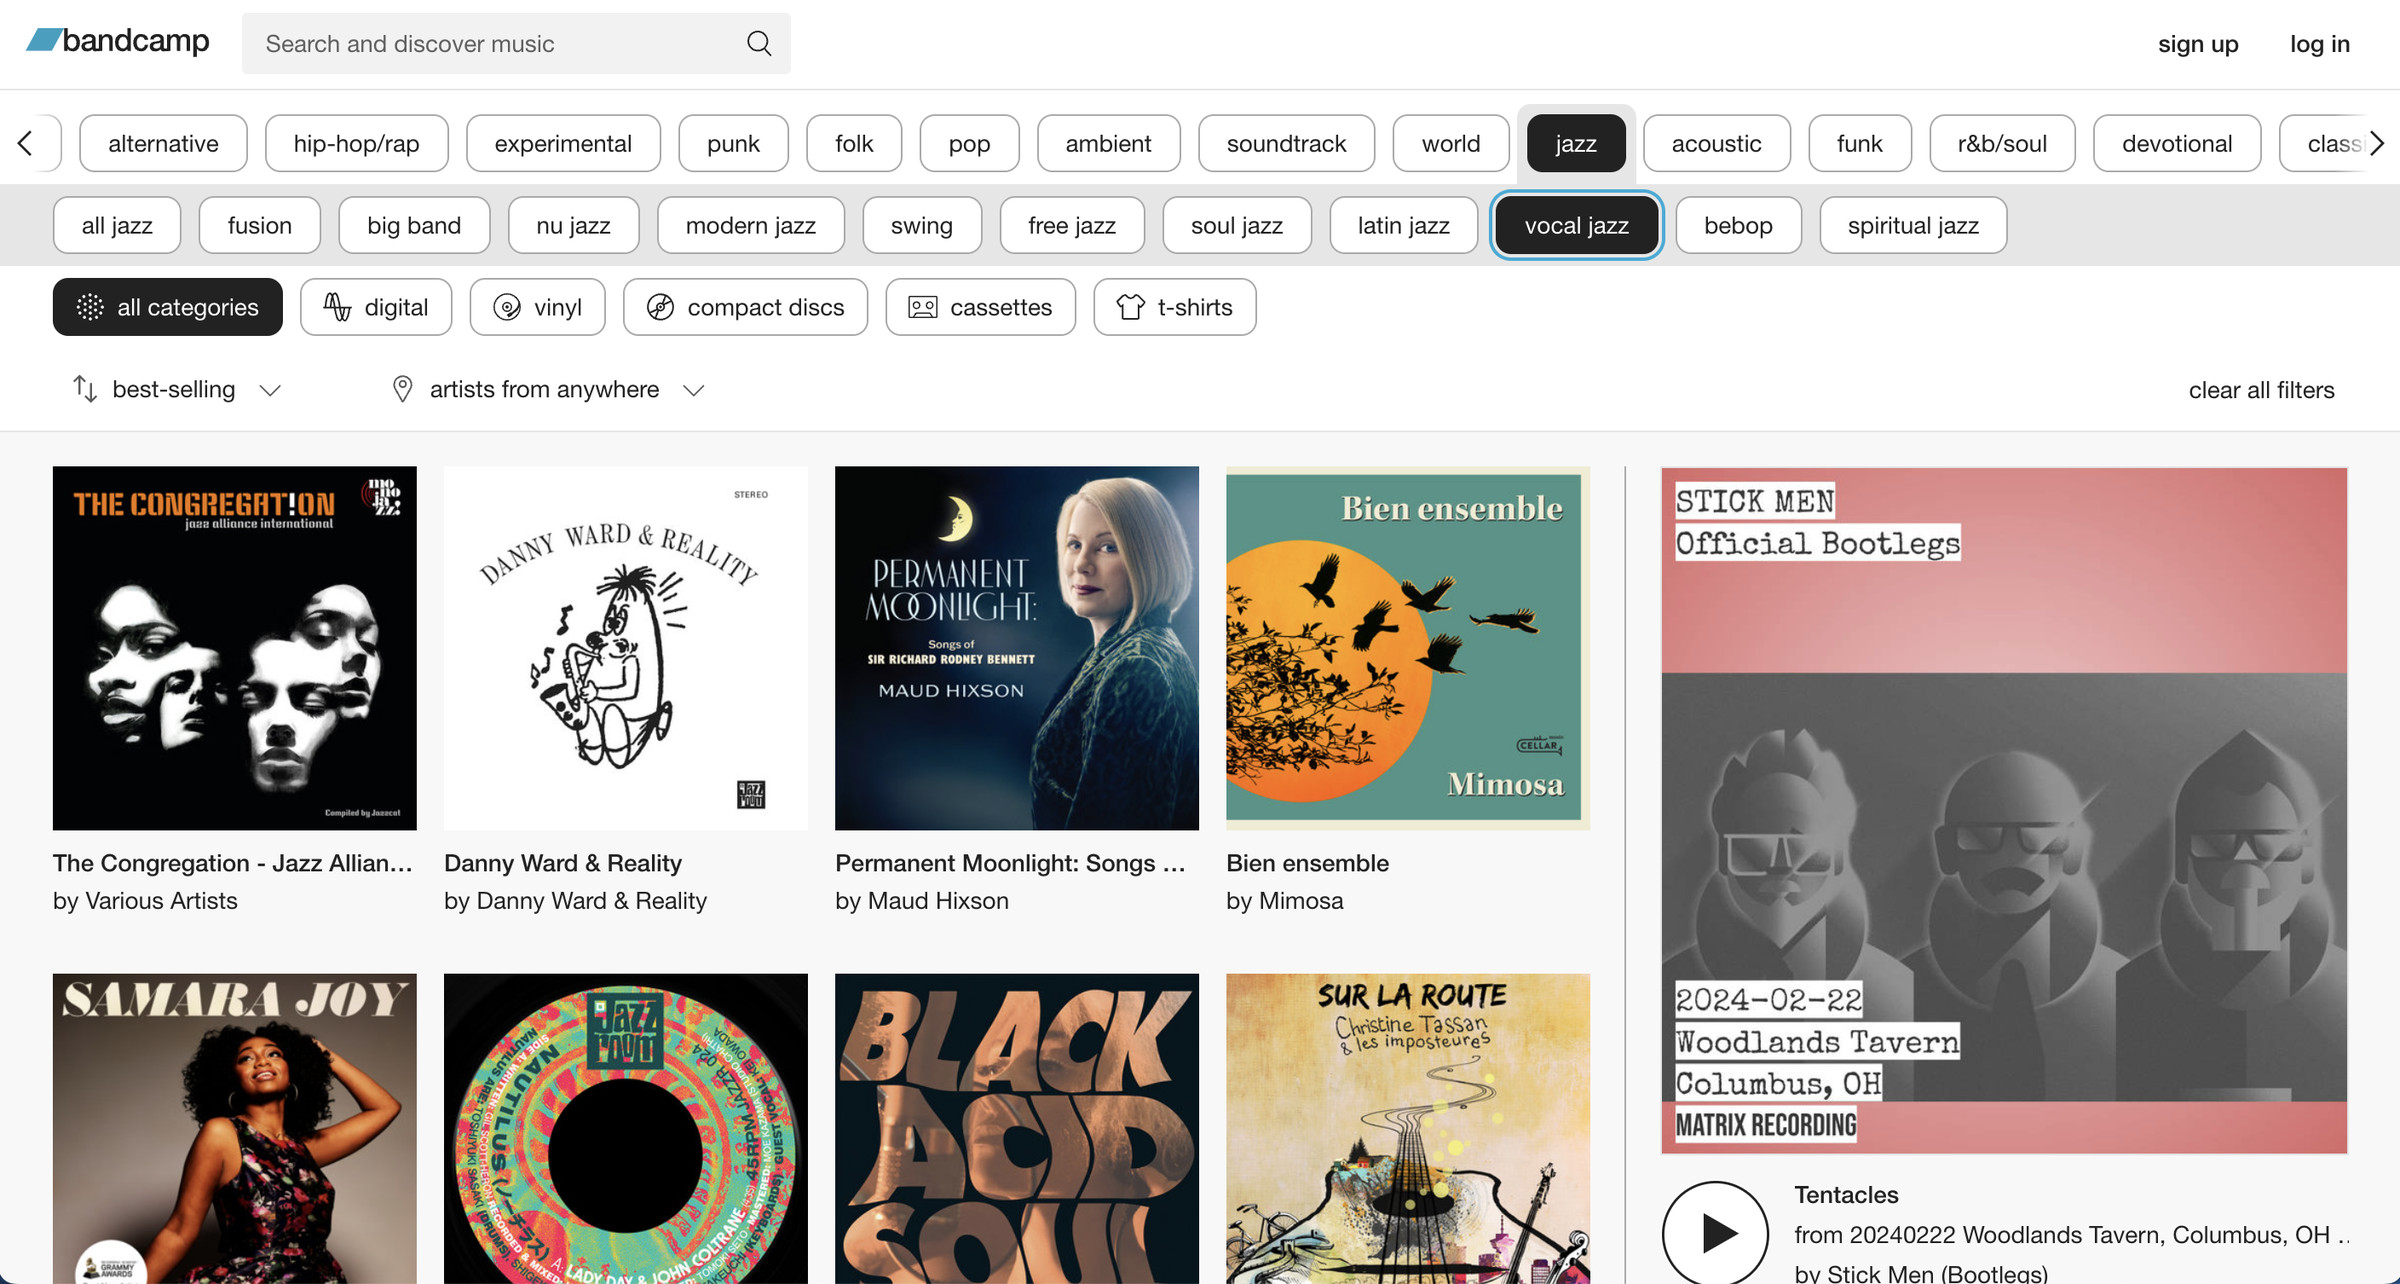 Bandcamp website with lists of genres on top and various artists shown in squares below.